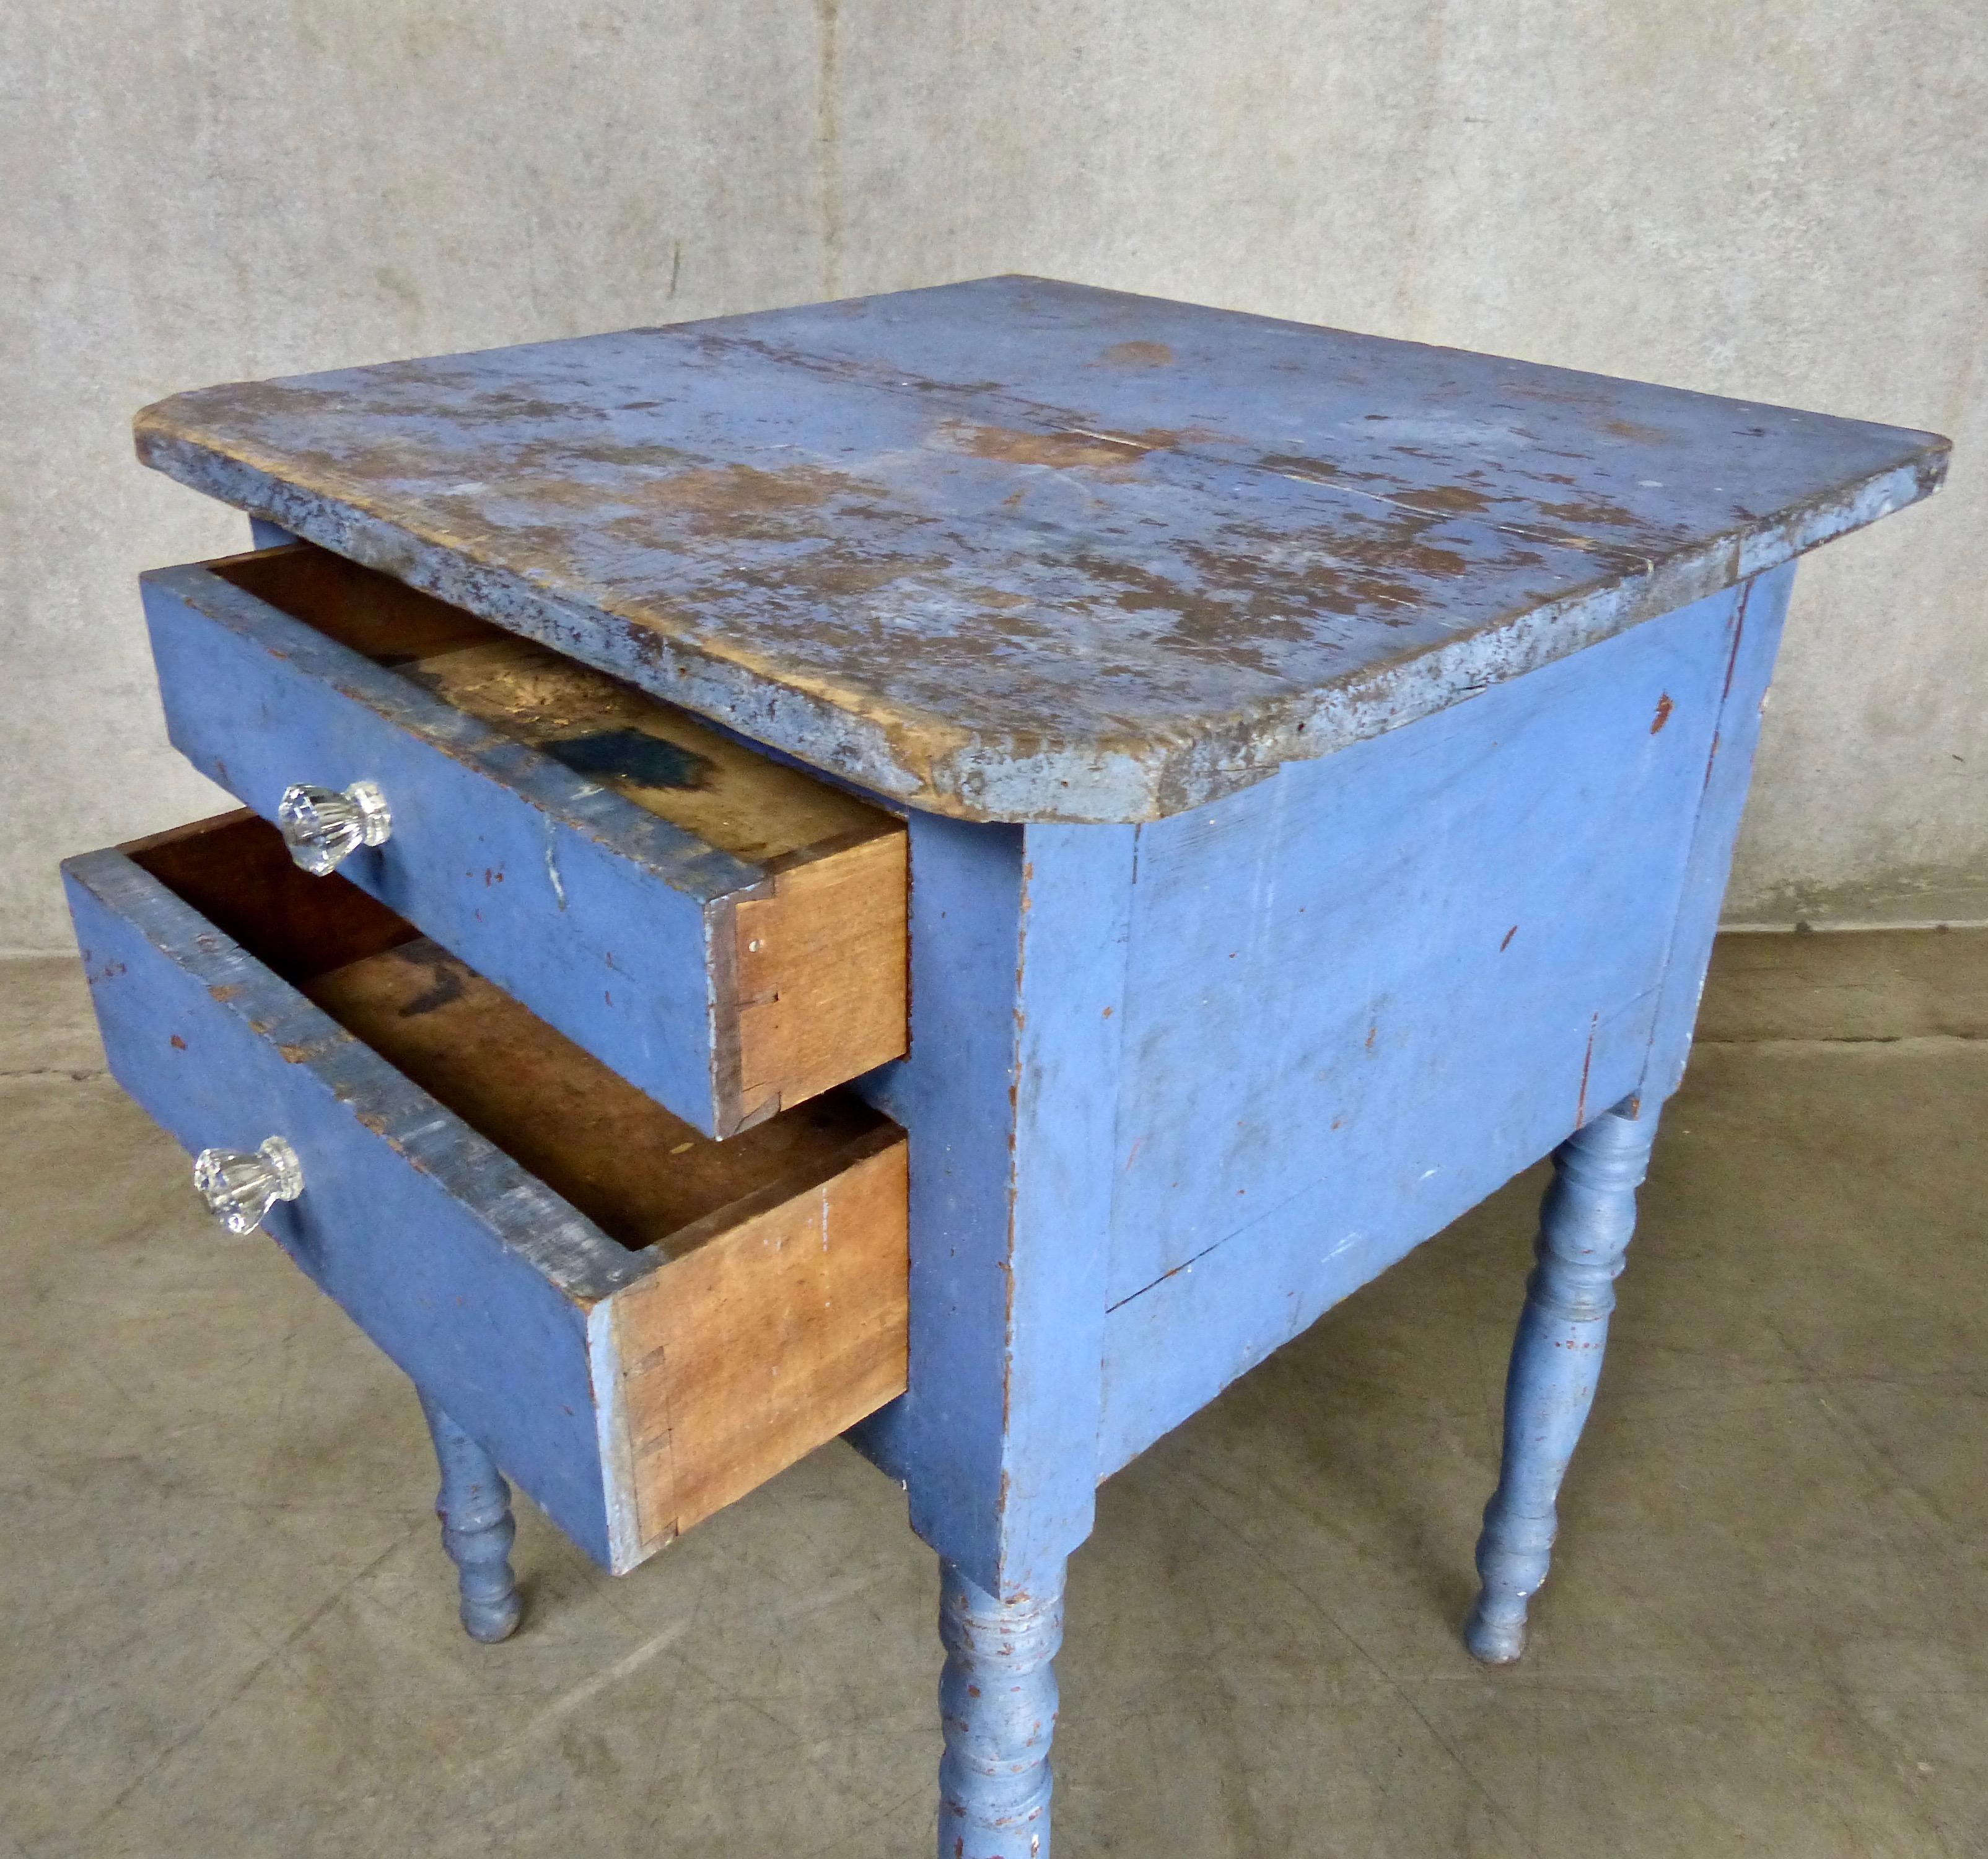 Very nice mid-19th century stand featuring an untouched blue surface paint over old varnish , oxidized and showing a beautiful age cracked finish. Case as well as drawers are dovetailed construction.
The stand is made of cherry wood with pine